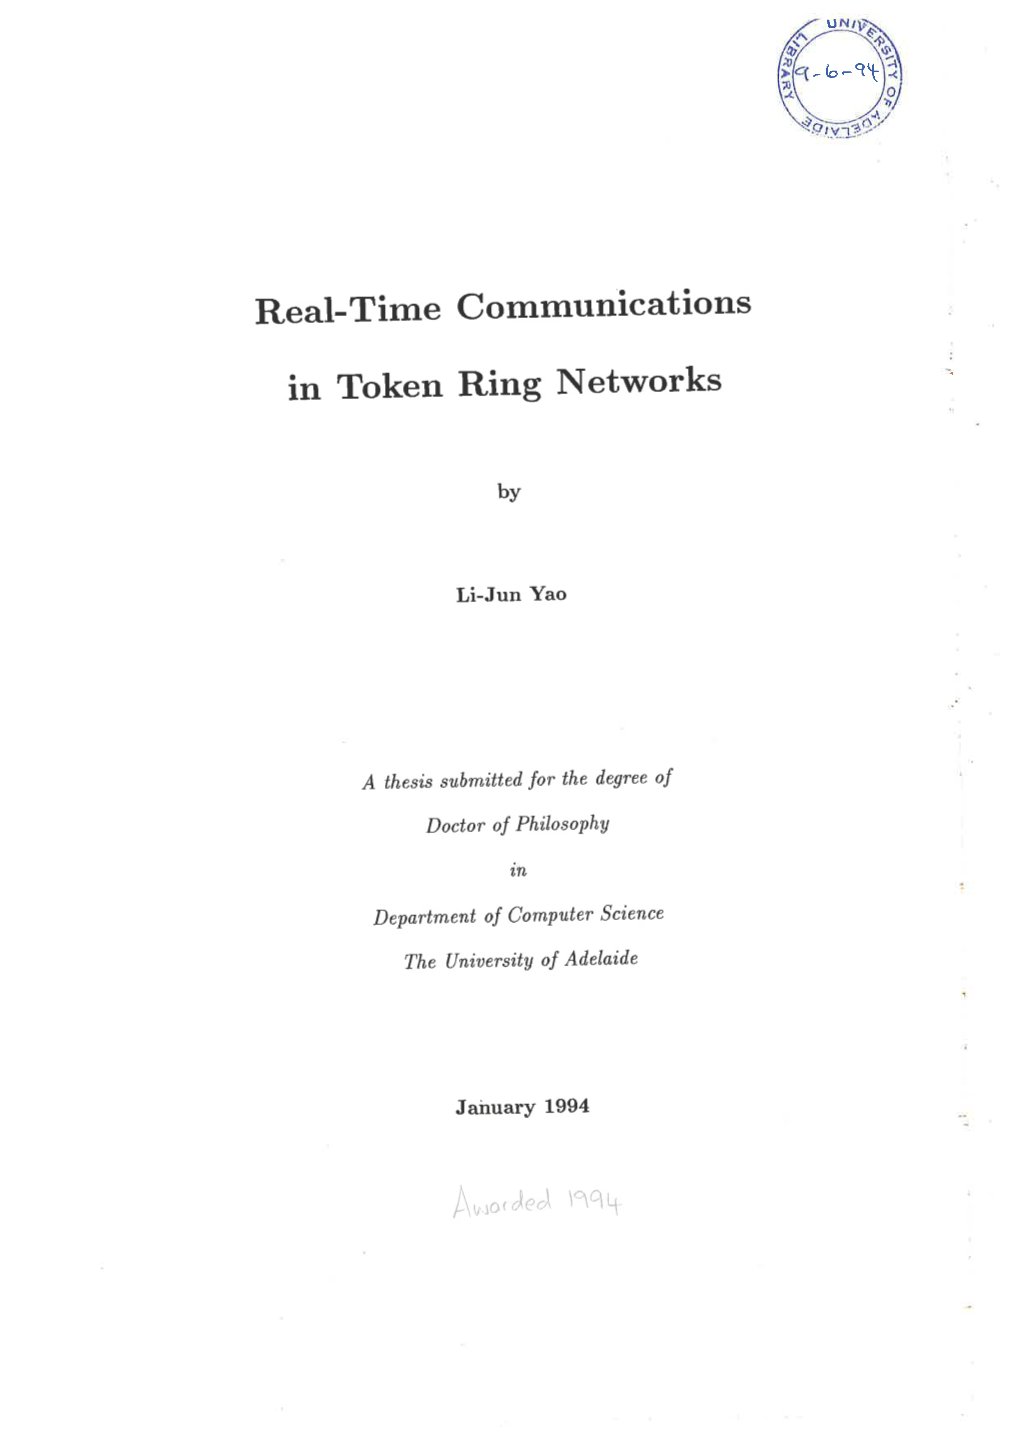 Real-Time Communications in Token Ring Networks